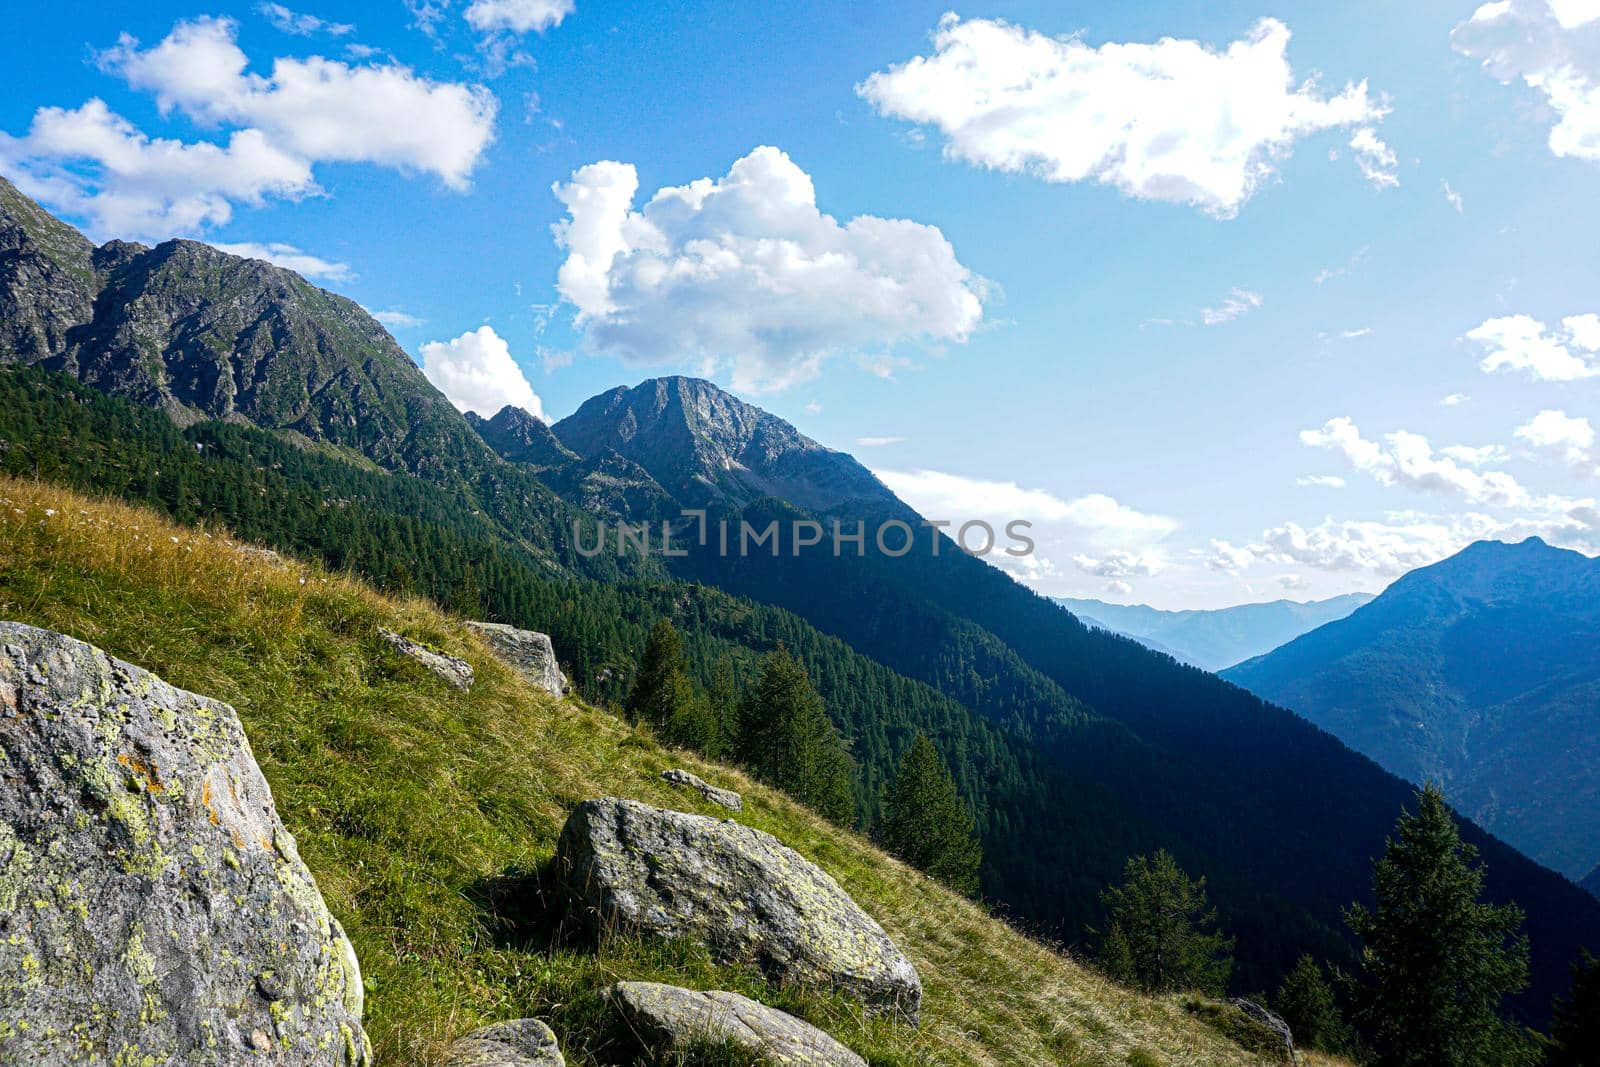 Incredible landscape in the Lavizzara Valley, Ticino by pisces2386